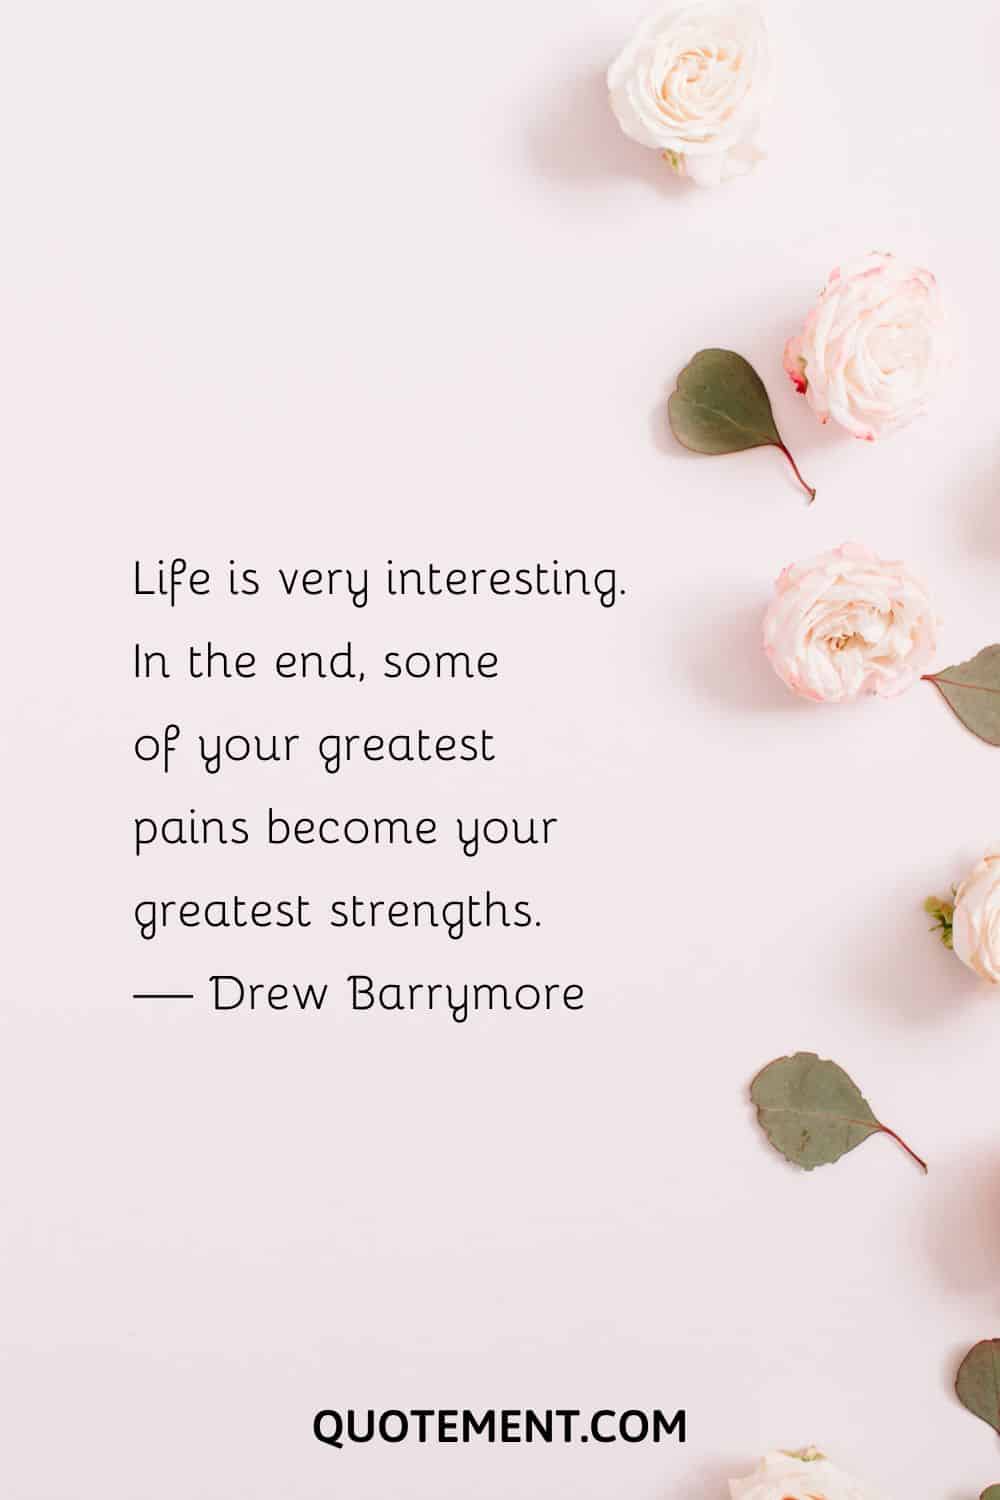 Life is very interesting. In the end, some of your greatest pains become your greatest strengths